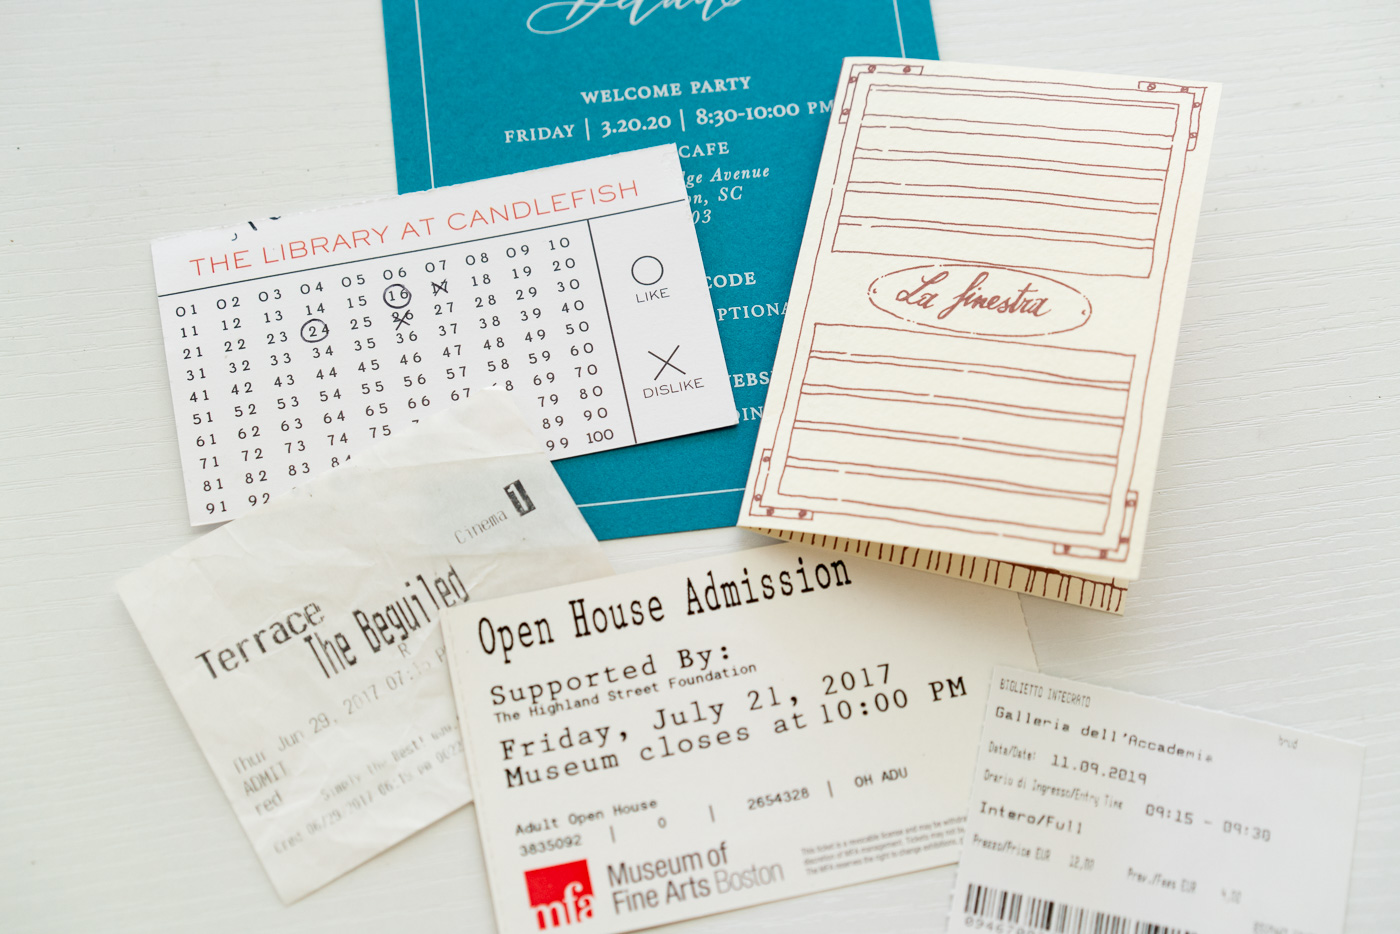 Collection of memorabilia like tickets and invitations for scrapbooking